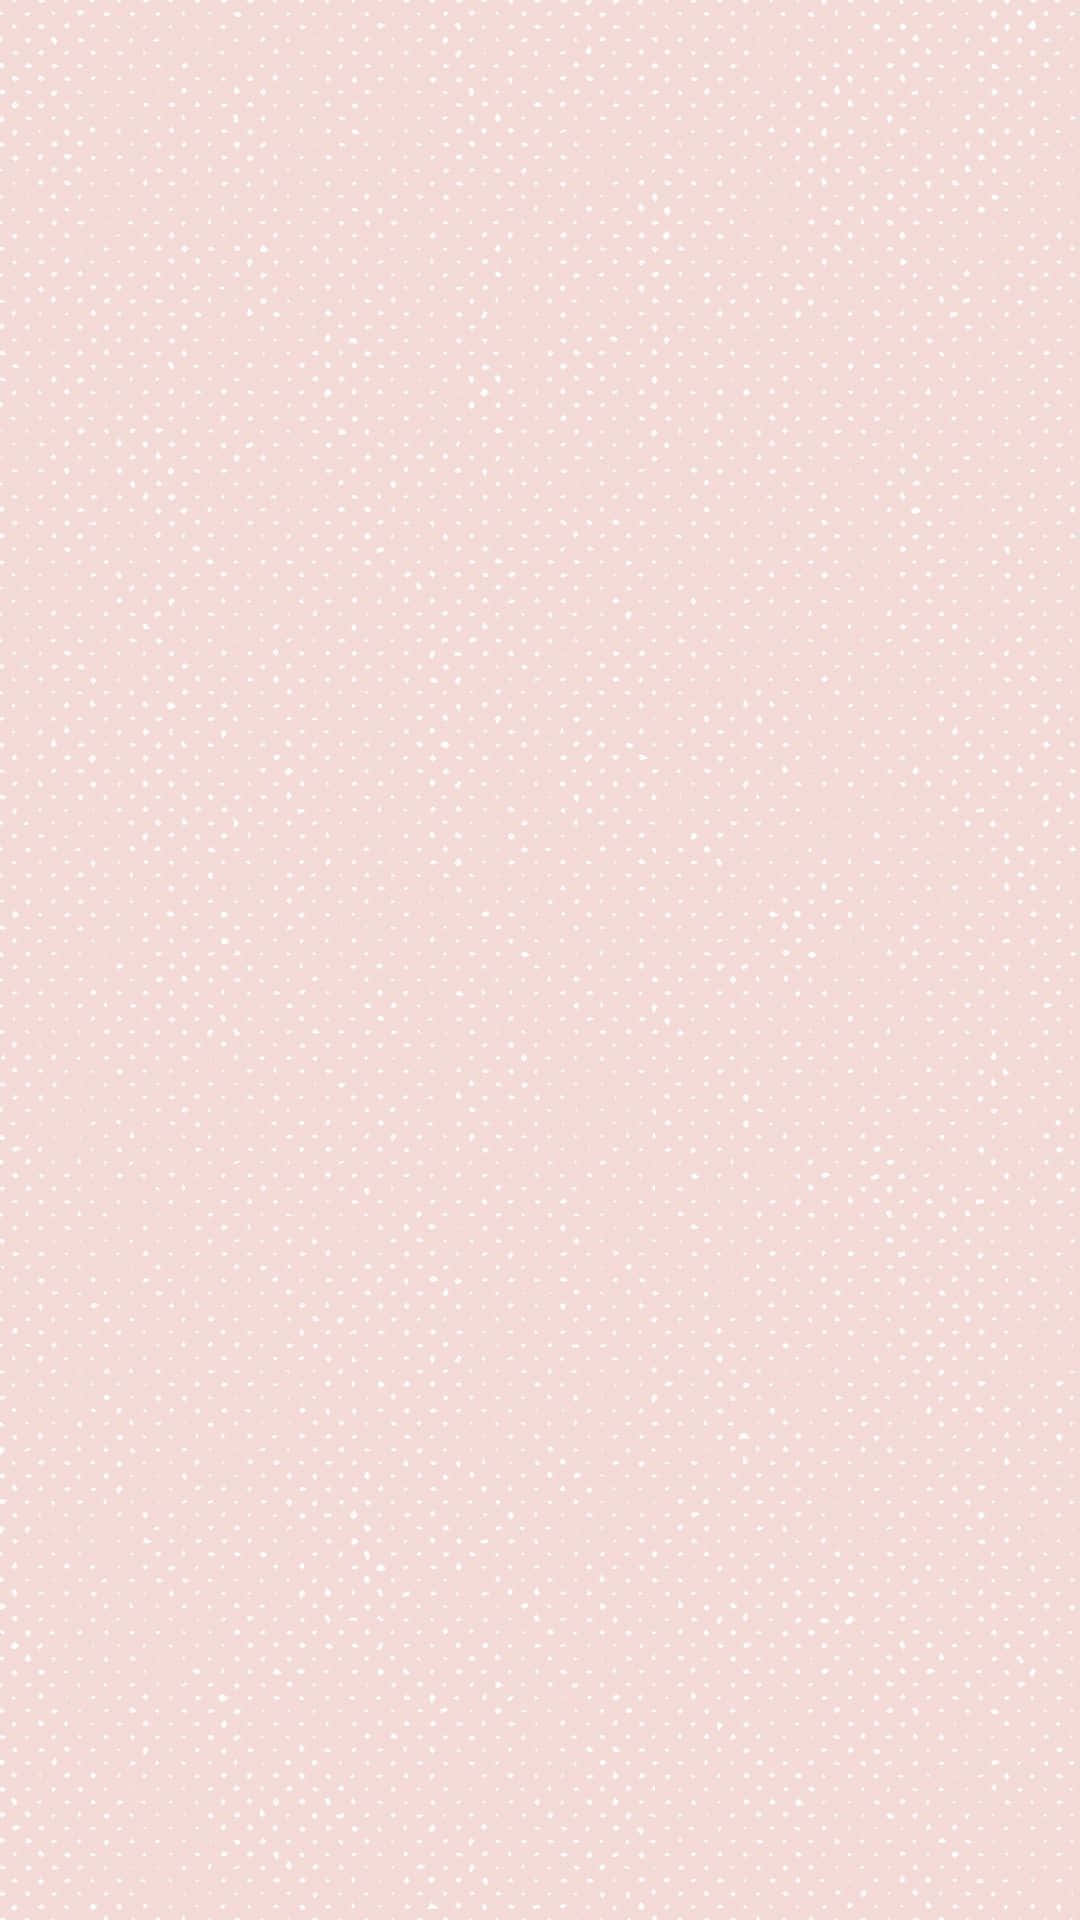 Get noticed with the stylish Light Pink Iphone Wallpaper